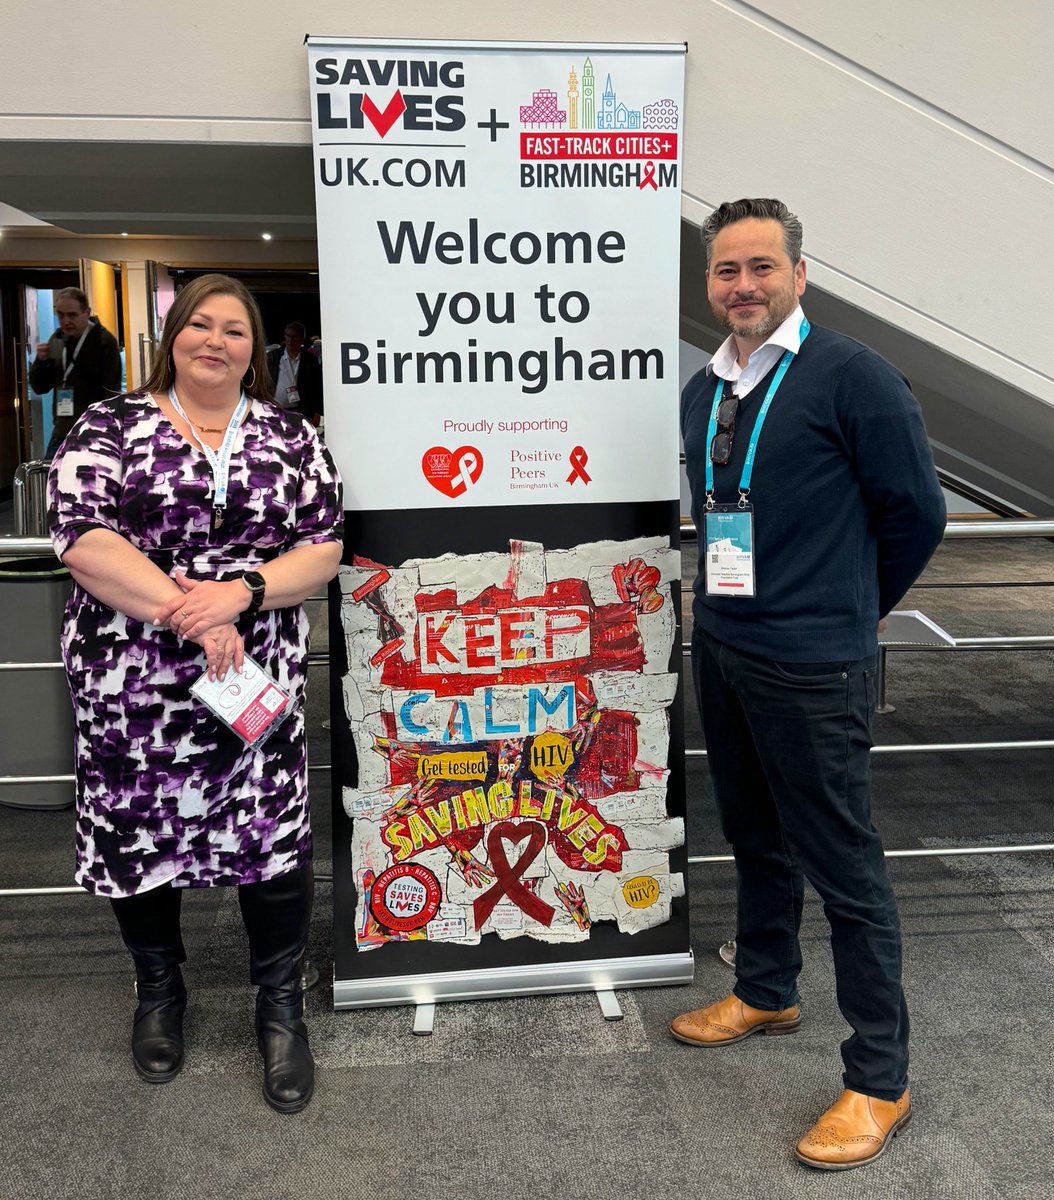 #TeamSavingLives are proud to be the local hosts for #BHIVA24 at the ICC Birmingham. ♥️ Swing past stand 17 and come say hello 👋